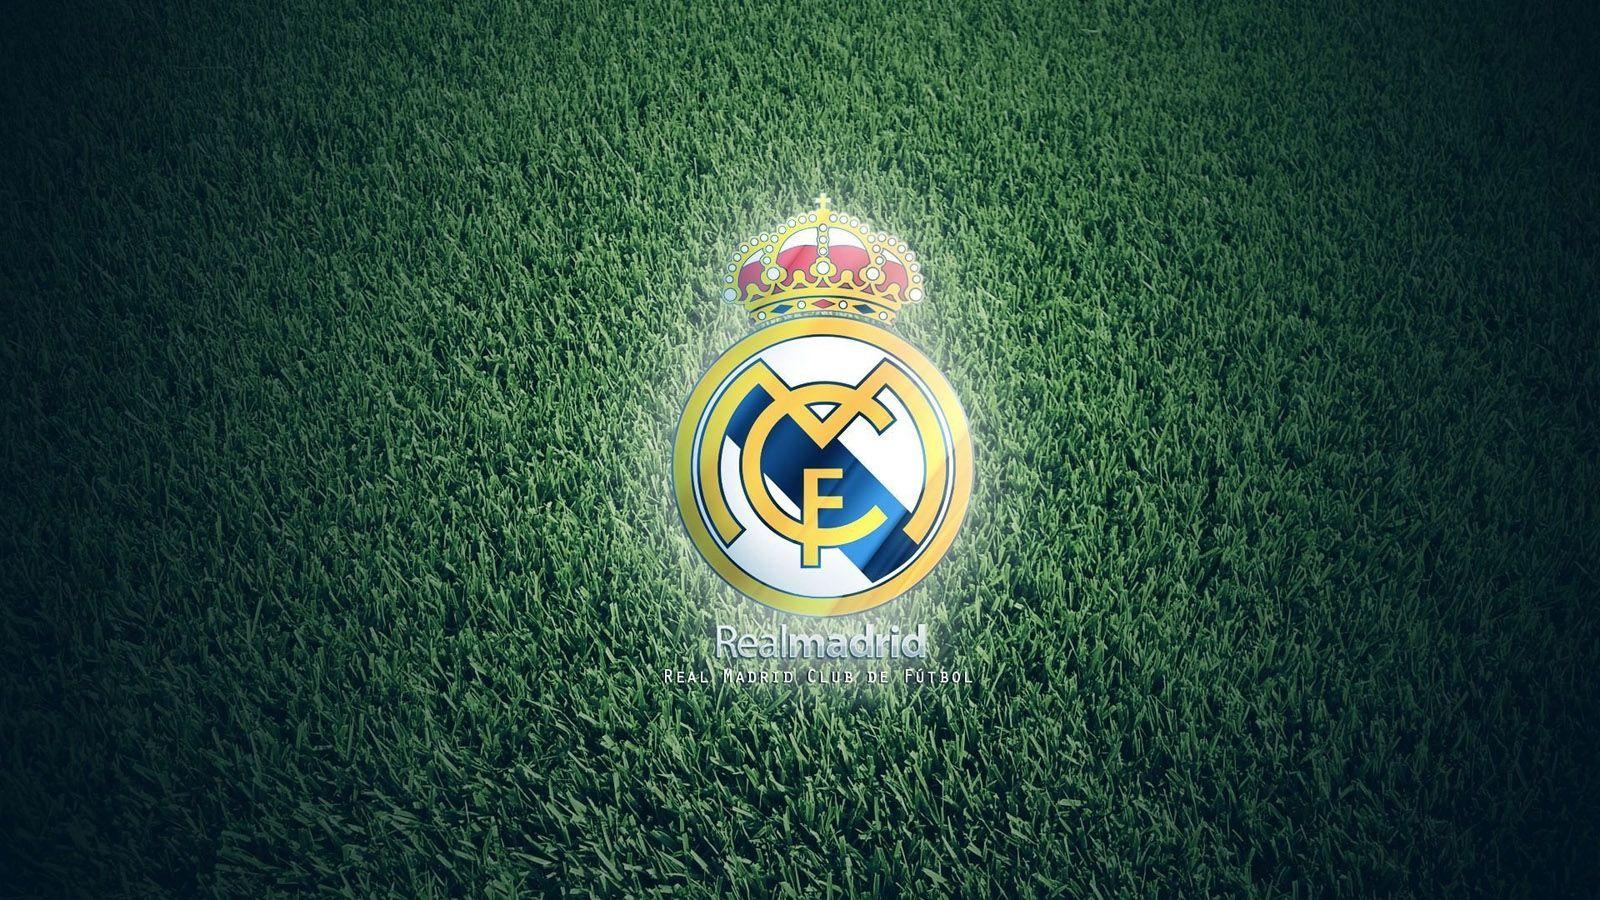 Free Download Real Madrid 2013 HD Wallpaper Background. Wallsaved